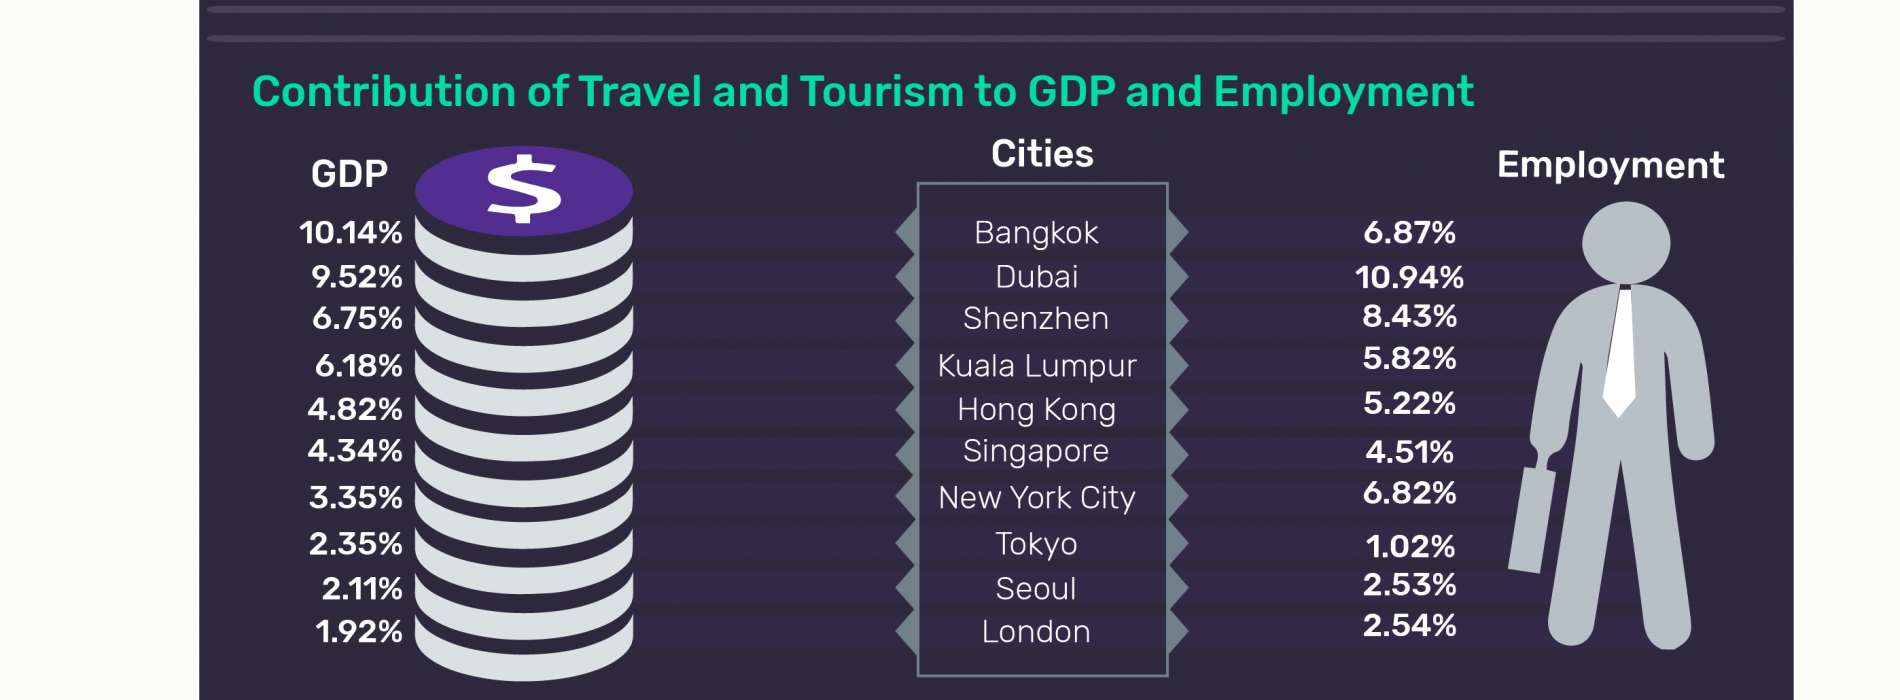 Asian cities dominate top 10 rankings of international tourist arrivals in 2017, says GlobalData